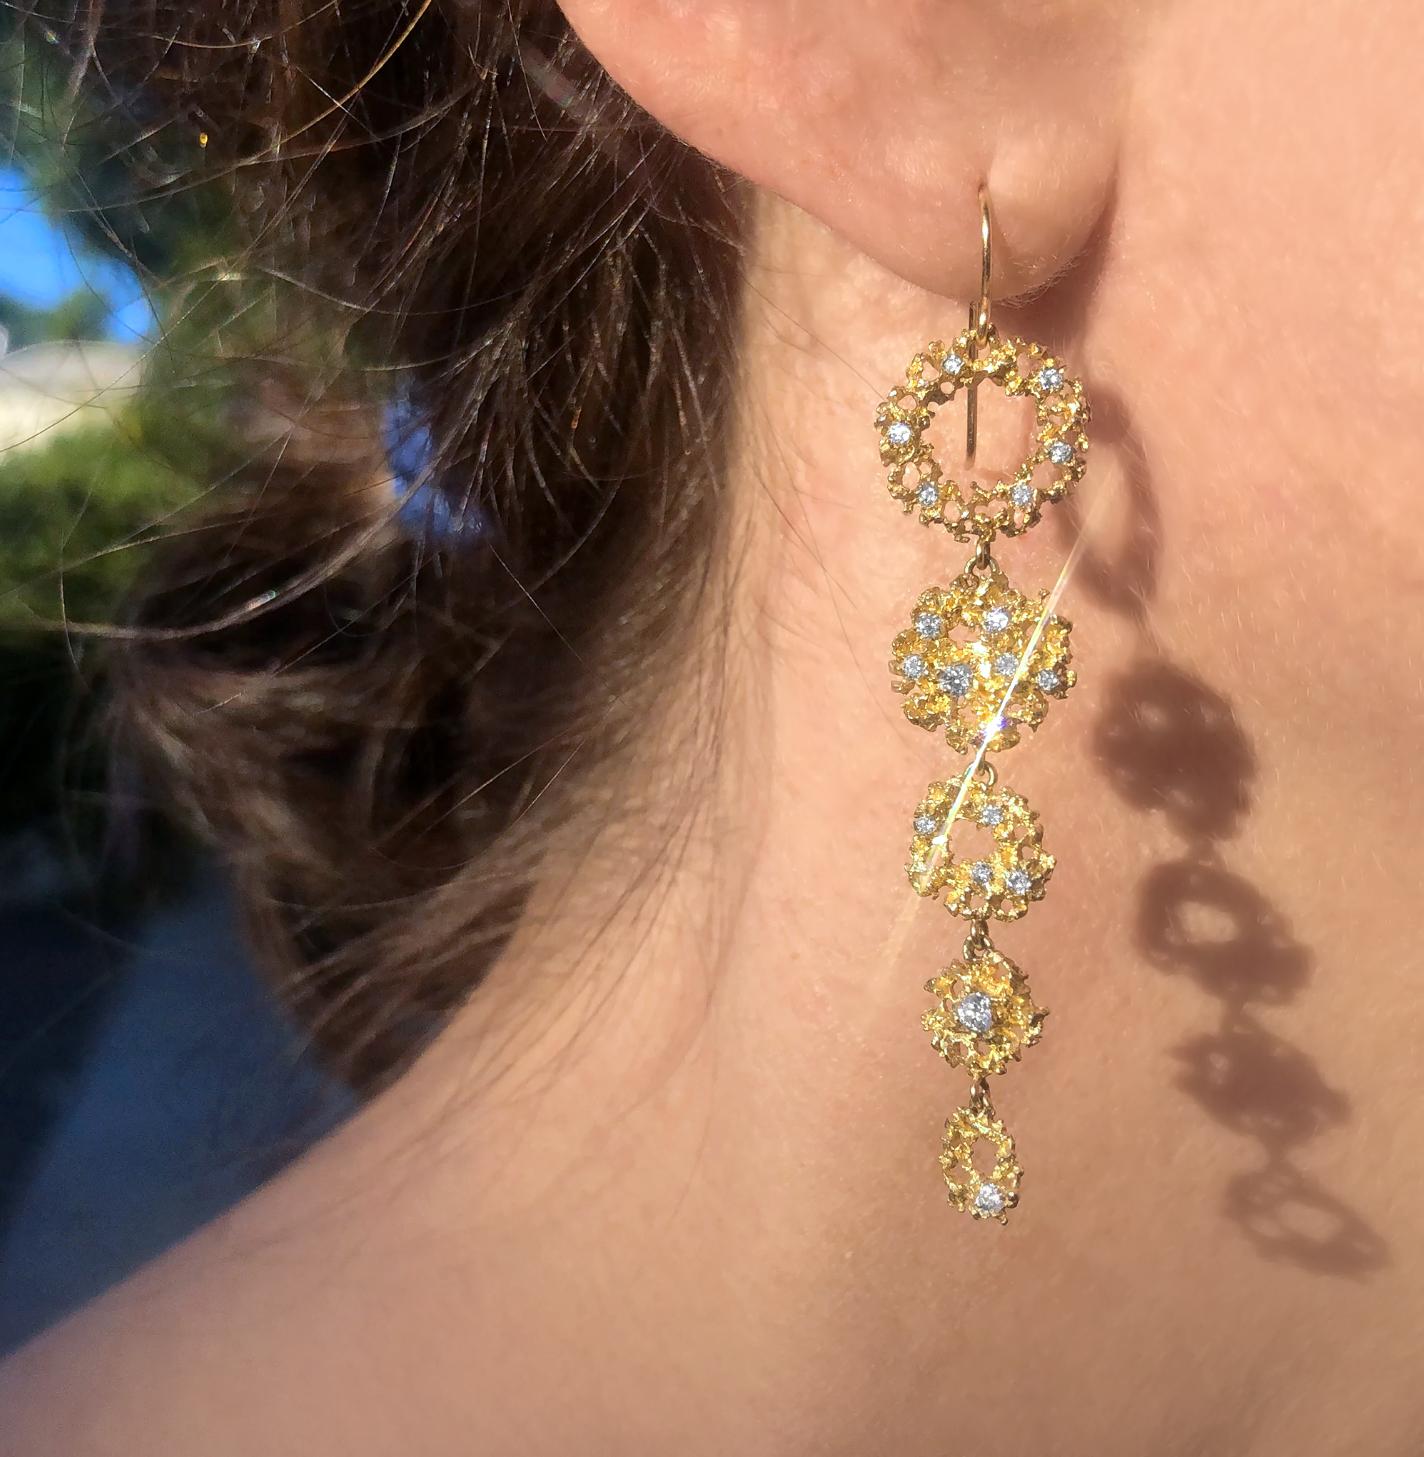 One of a Kind Galaxy Earrings intricately hand-fabricated in 18k yellow gold by Michele Scholnik, the master jewelry artist behind Branch, featuring 18 round brilliant-cut white diamonds on each earring totaling 0.50 carats. The five elements in